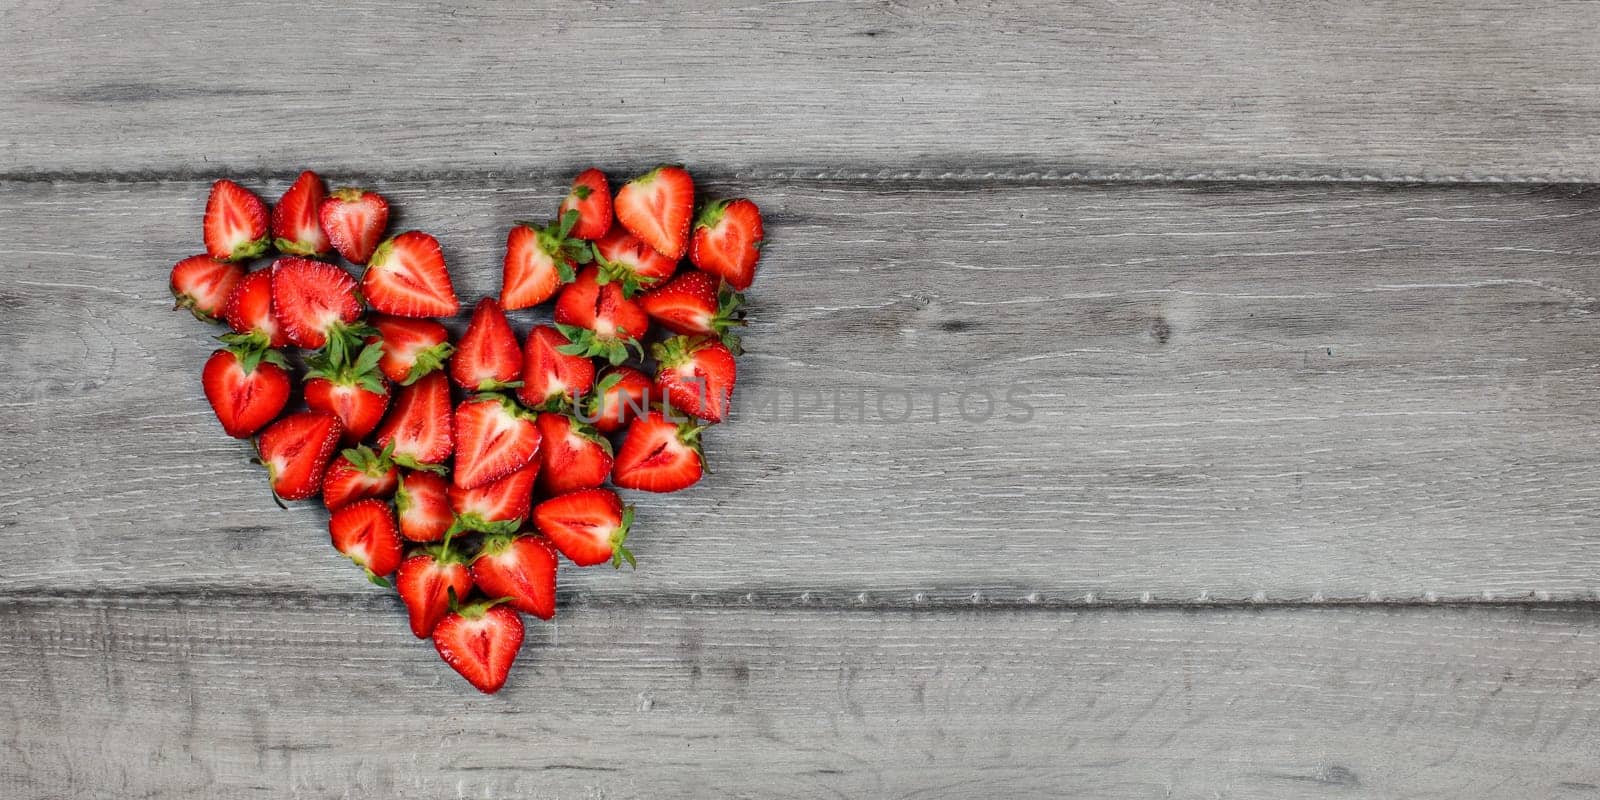 Top-down view - heart made of strawberry pieces on gray wood desk. Space for text on right. by Ivanko